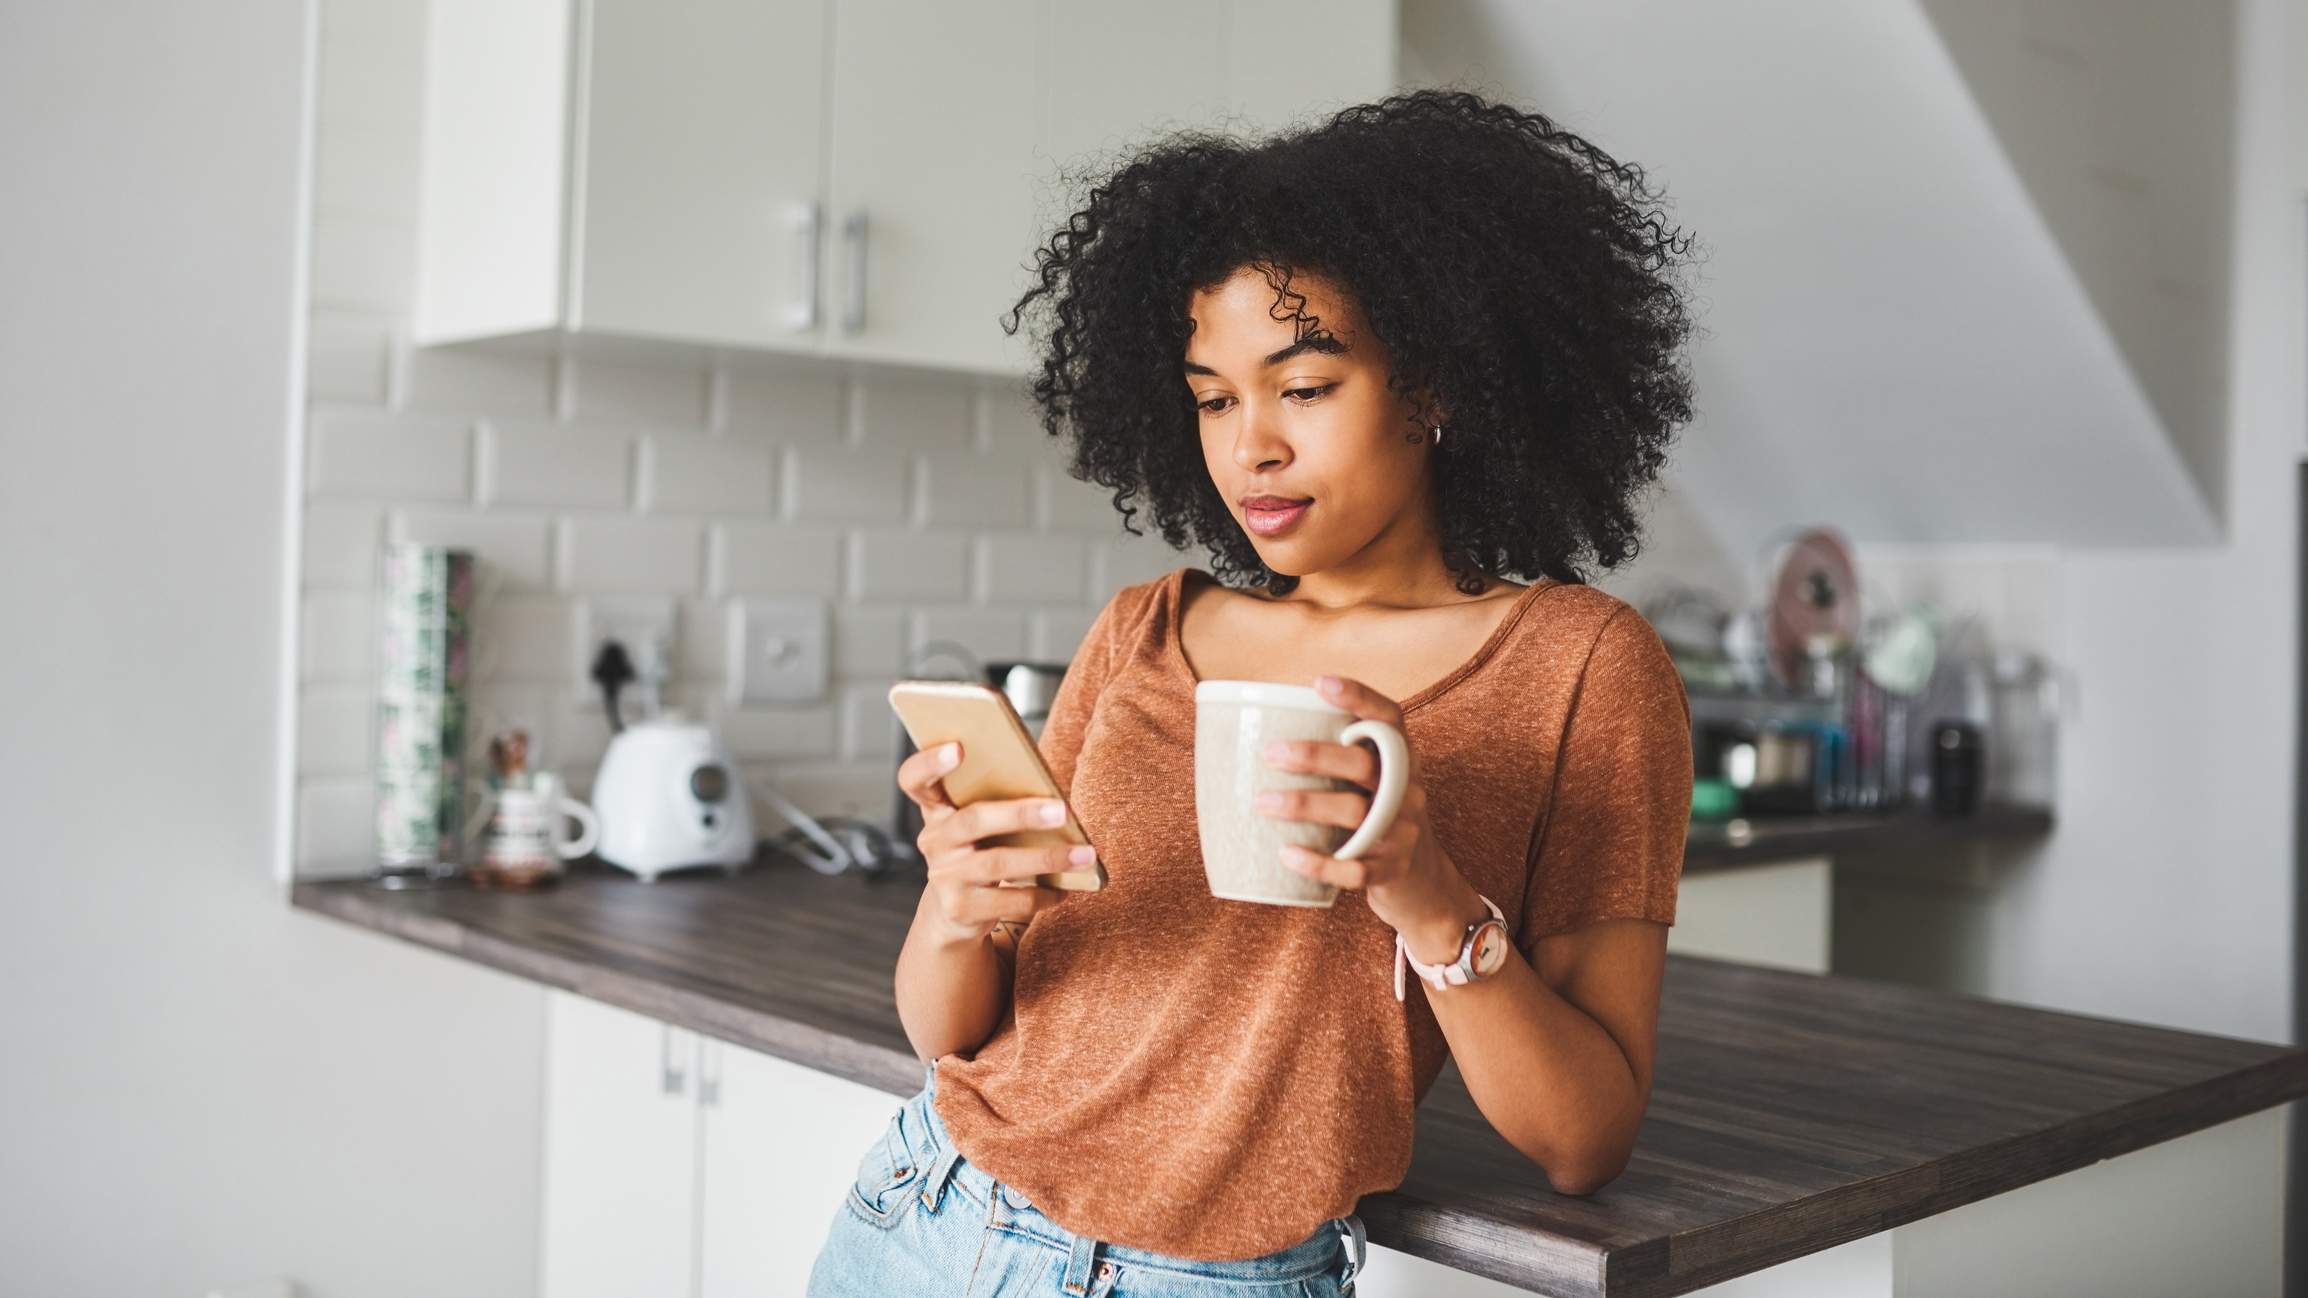 Young woman holding and viewing a smartphone while having coffee in the kitchen at home